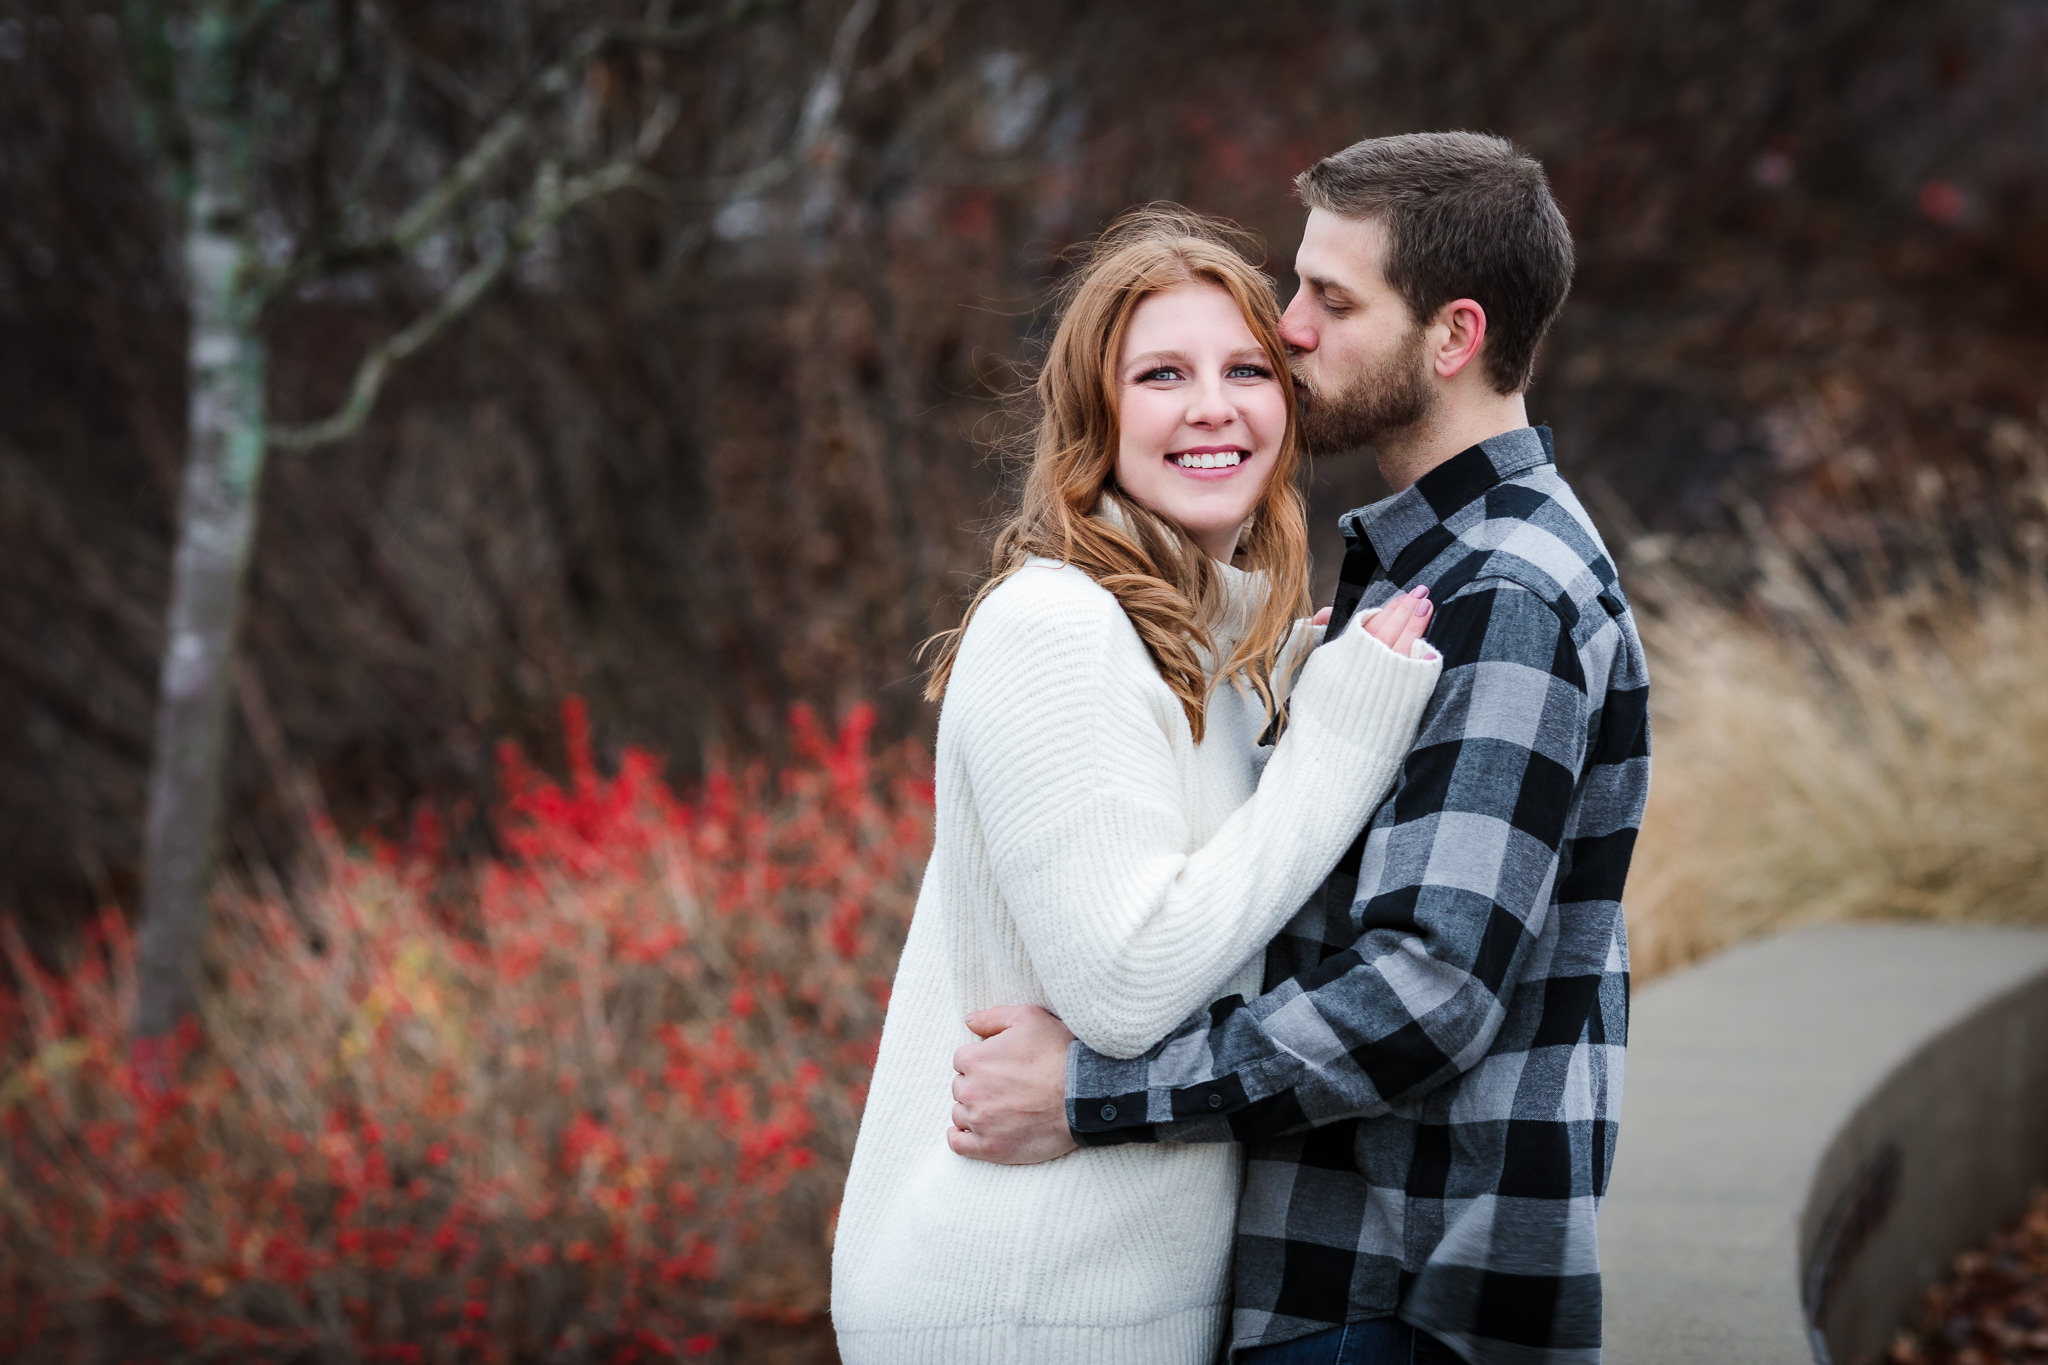 Groom-to-be kisses his fiance's head at a Christmas North Shore engagement session